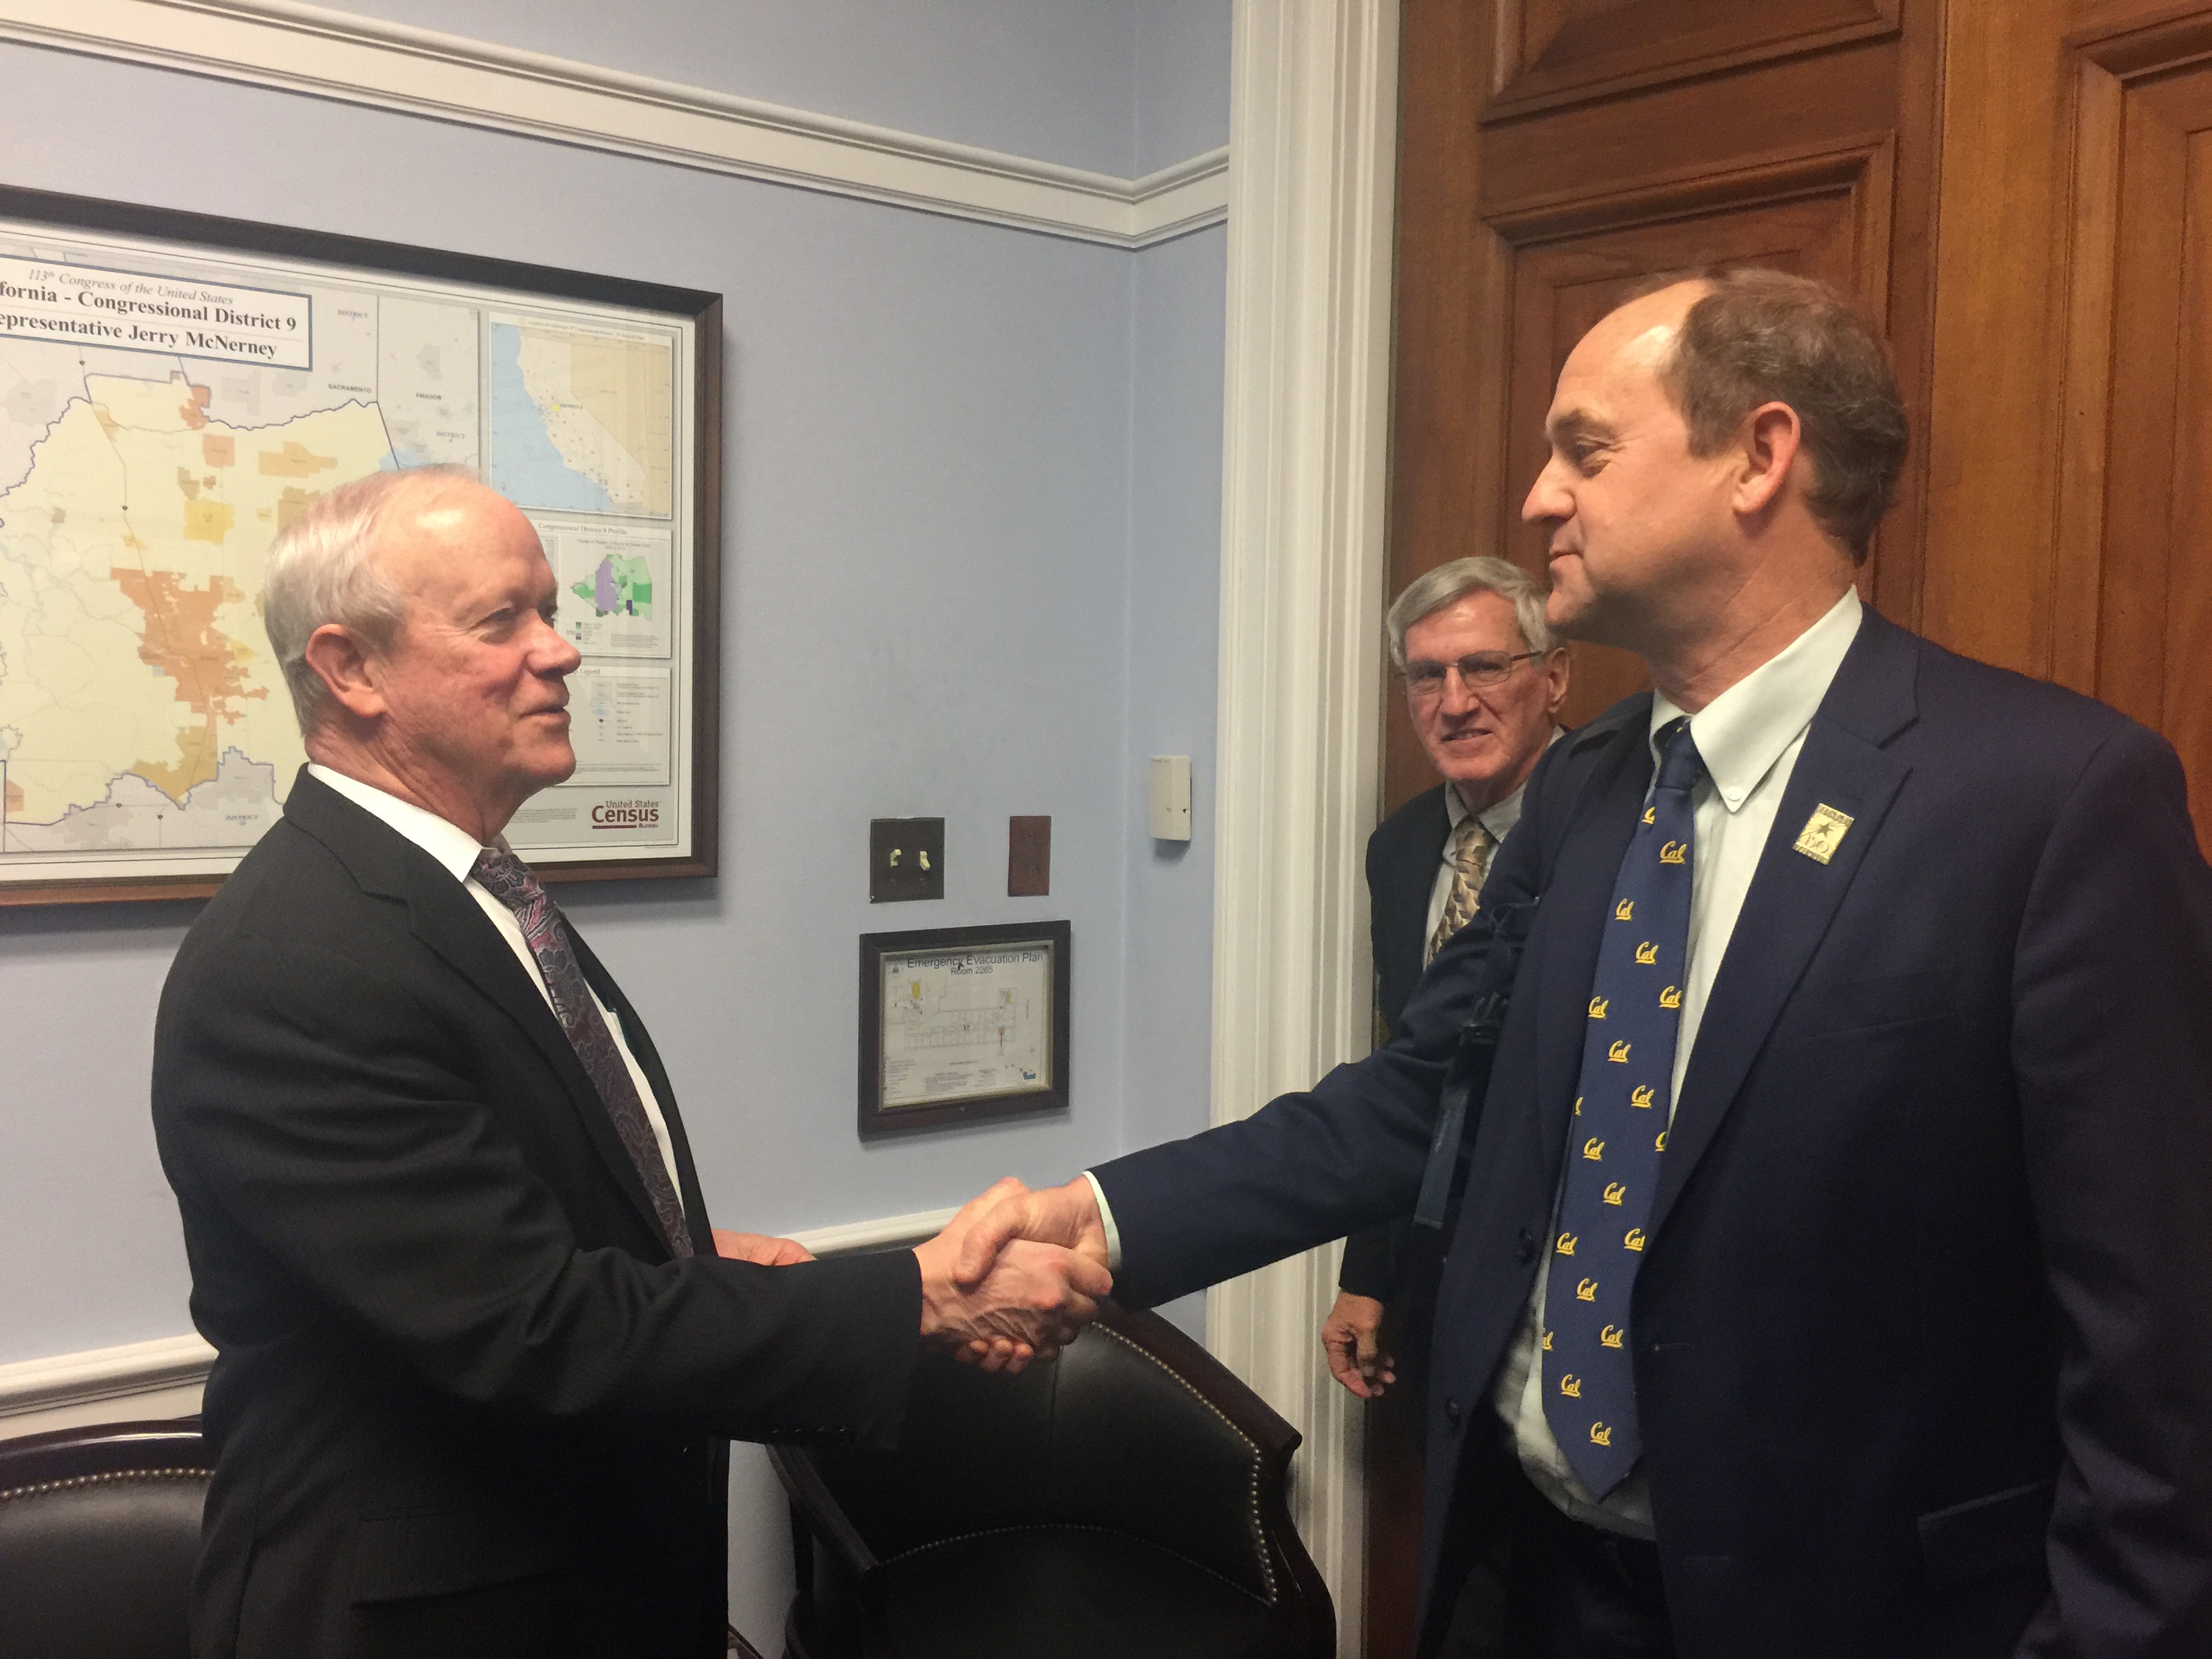 Meeting Congressman JERRY McNerney (D-CA) in his office 